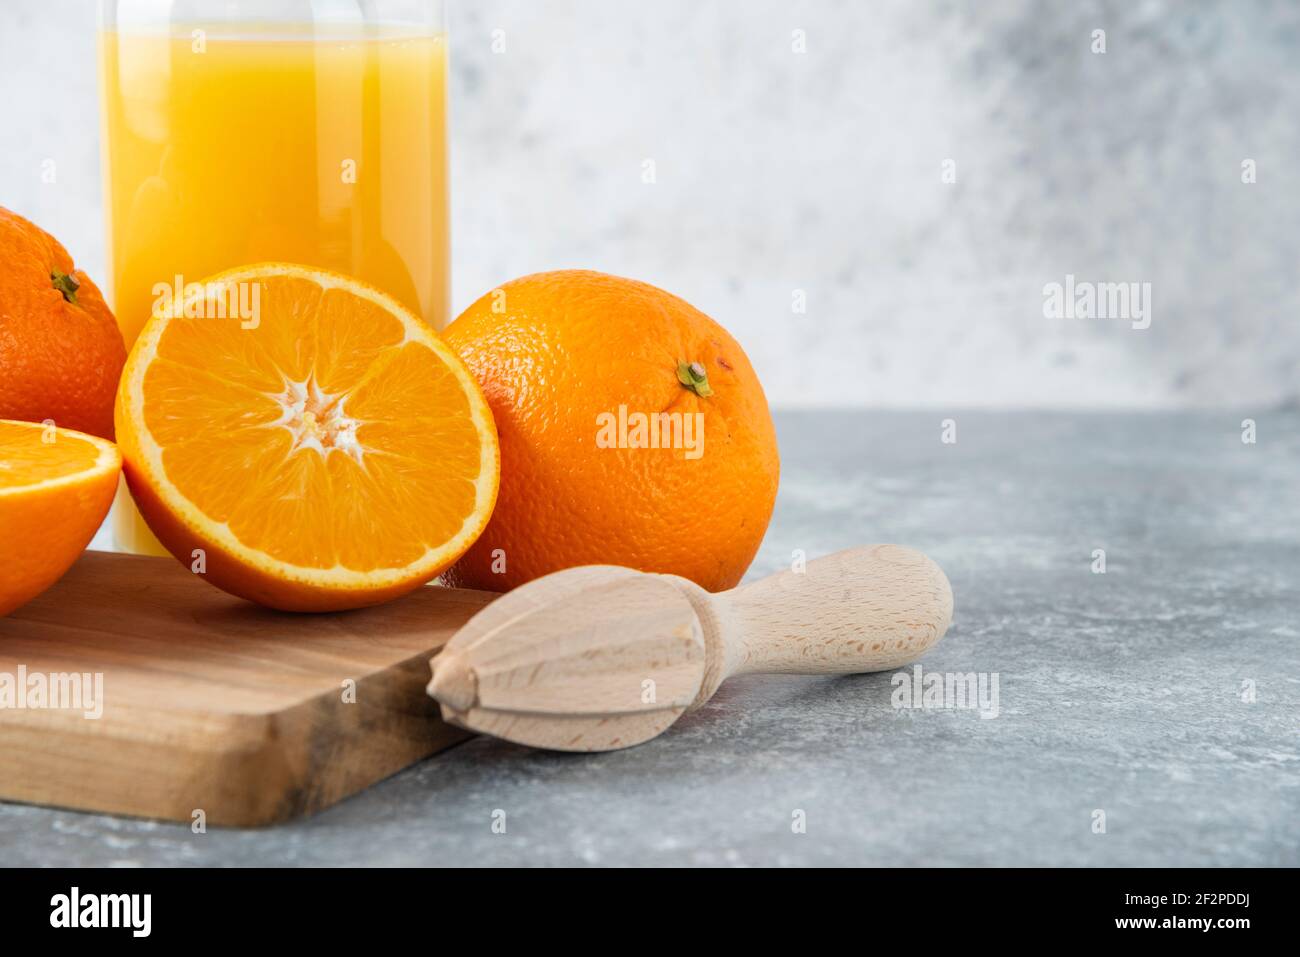 Glass pitcher of juice with sliced orange fruit on a wooden board Stock Photo